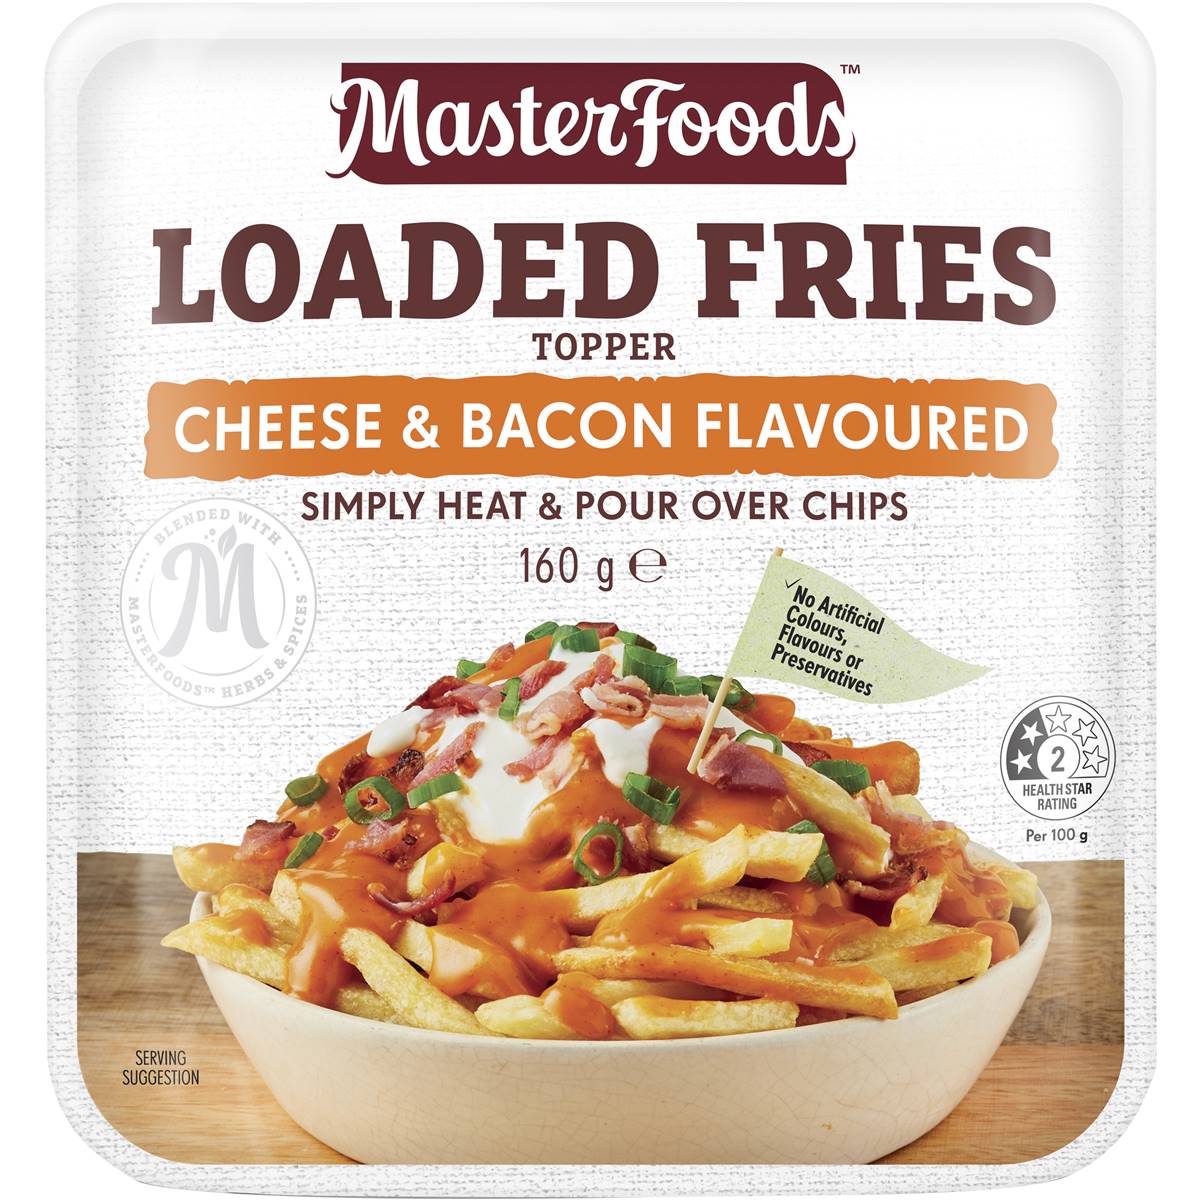 Calories in Masterfoods Loaded Fries Topper Cheese & Bacon Flavoured